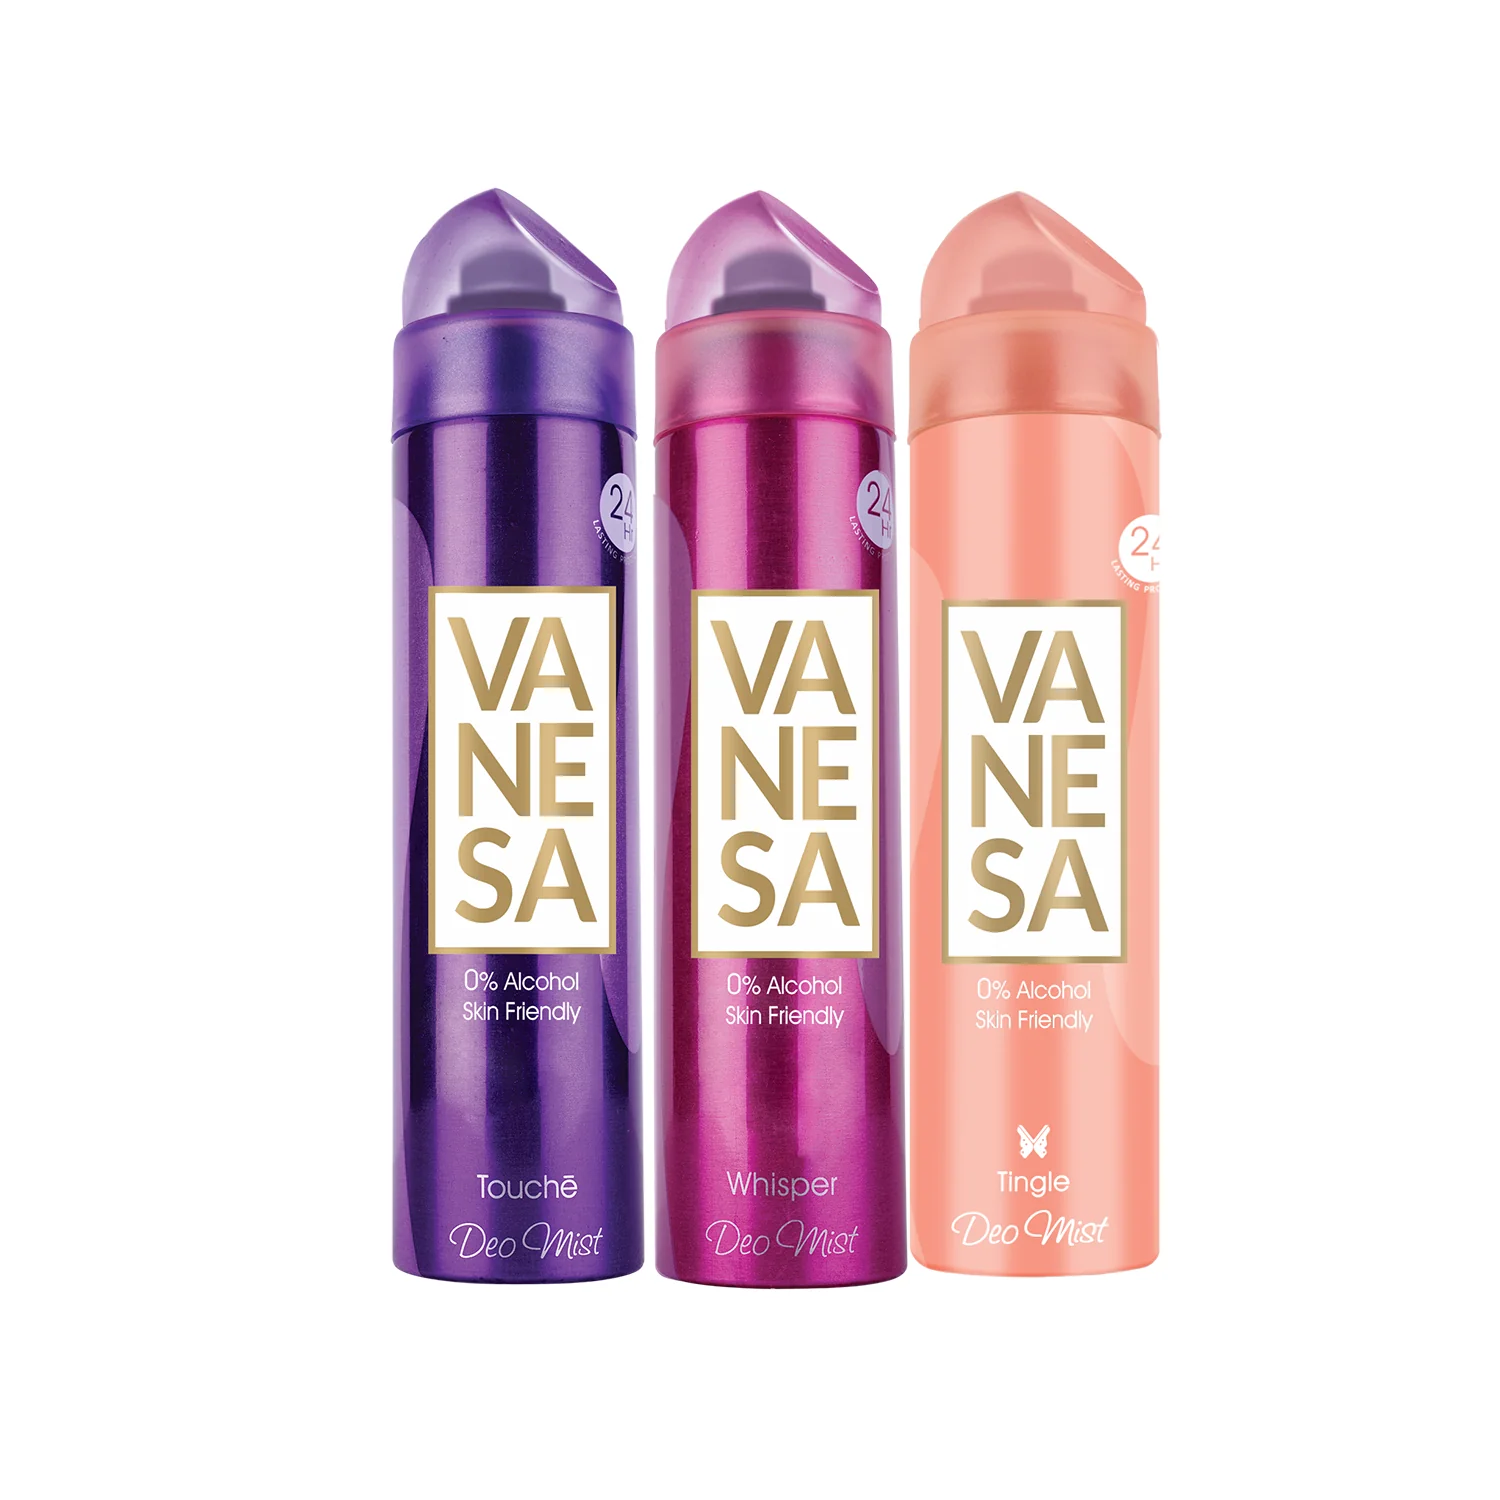 Vanesa Touche, Whisper & Tingle Deo Mist, 0% Alcohol | Skin Friendly | 24 hours Lasting Protection  For Women